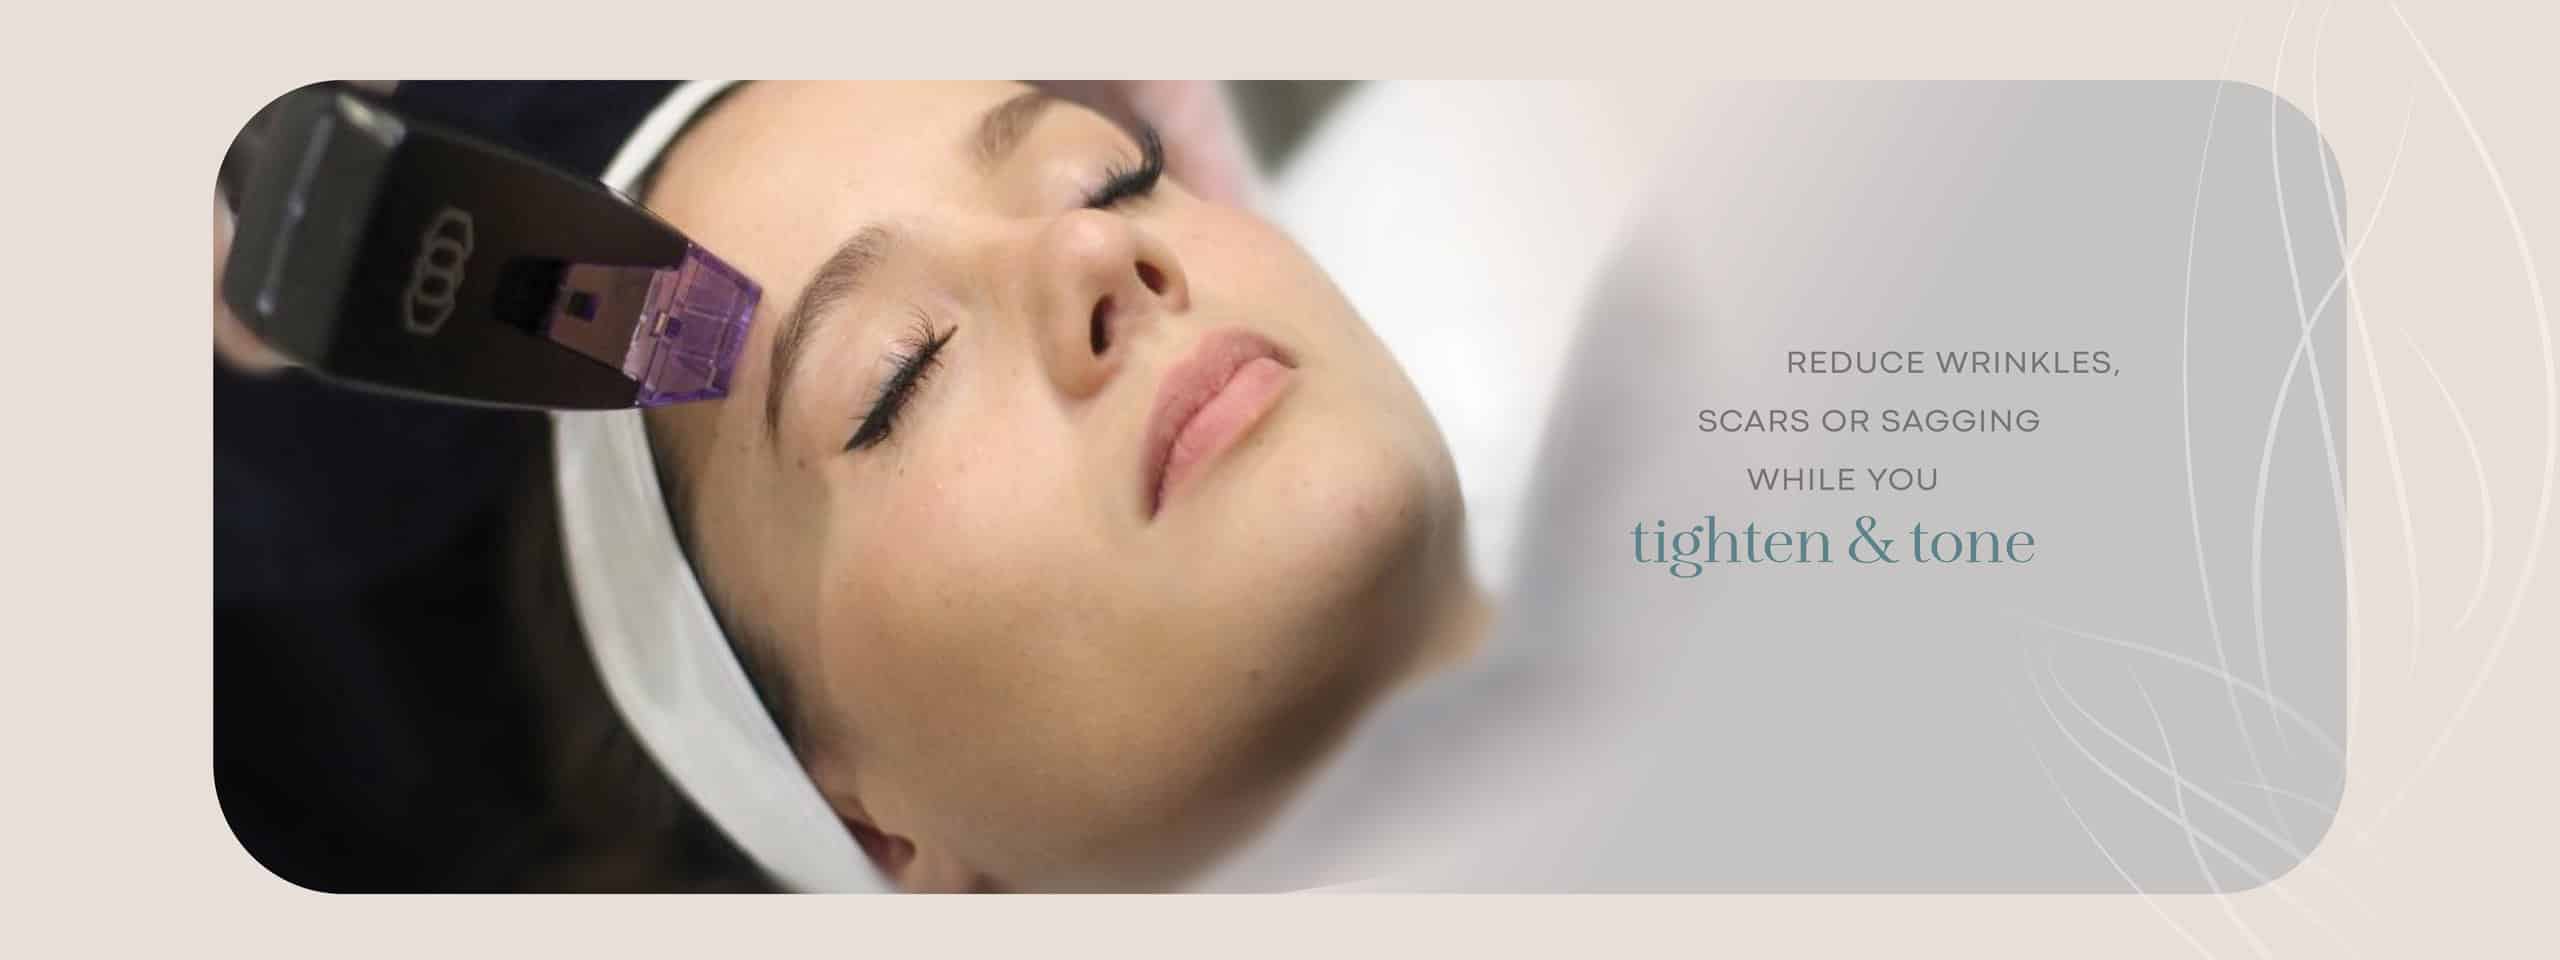 Microneedling at FBT Faith in Beauty Medical Aesthetics in Medway MA